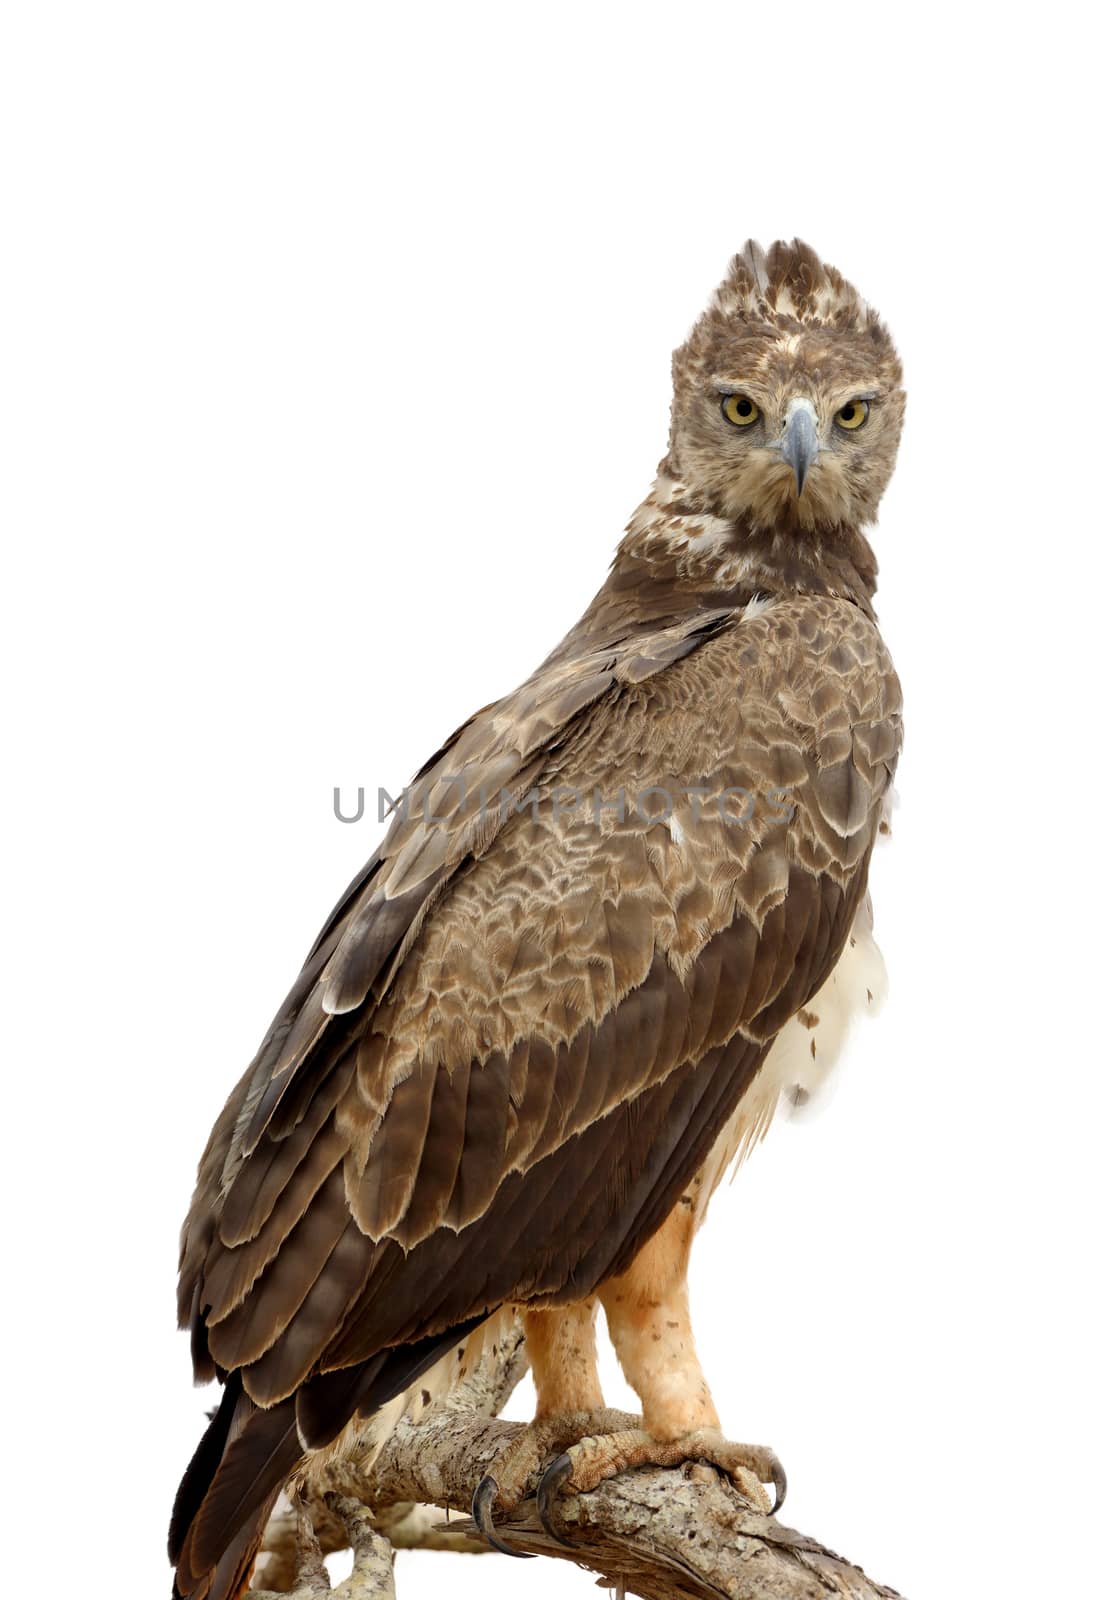 Tawny eagle (Aquila rapax) sitting on a branch tree isolaterd on white background